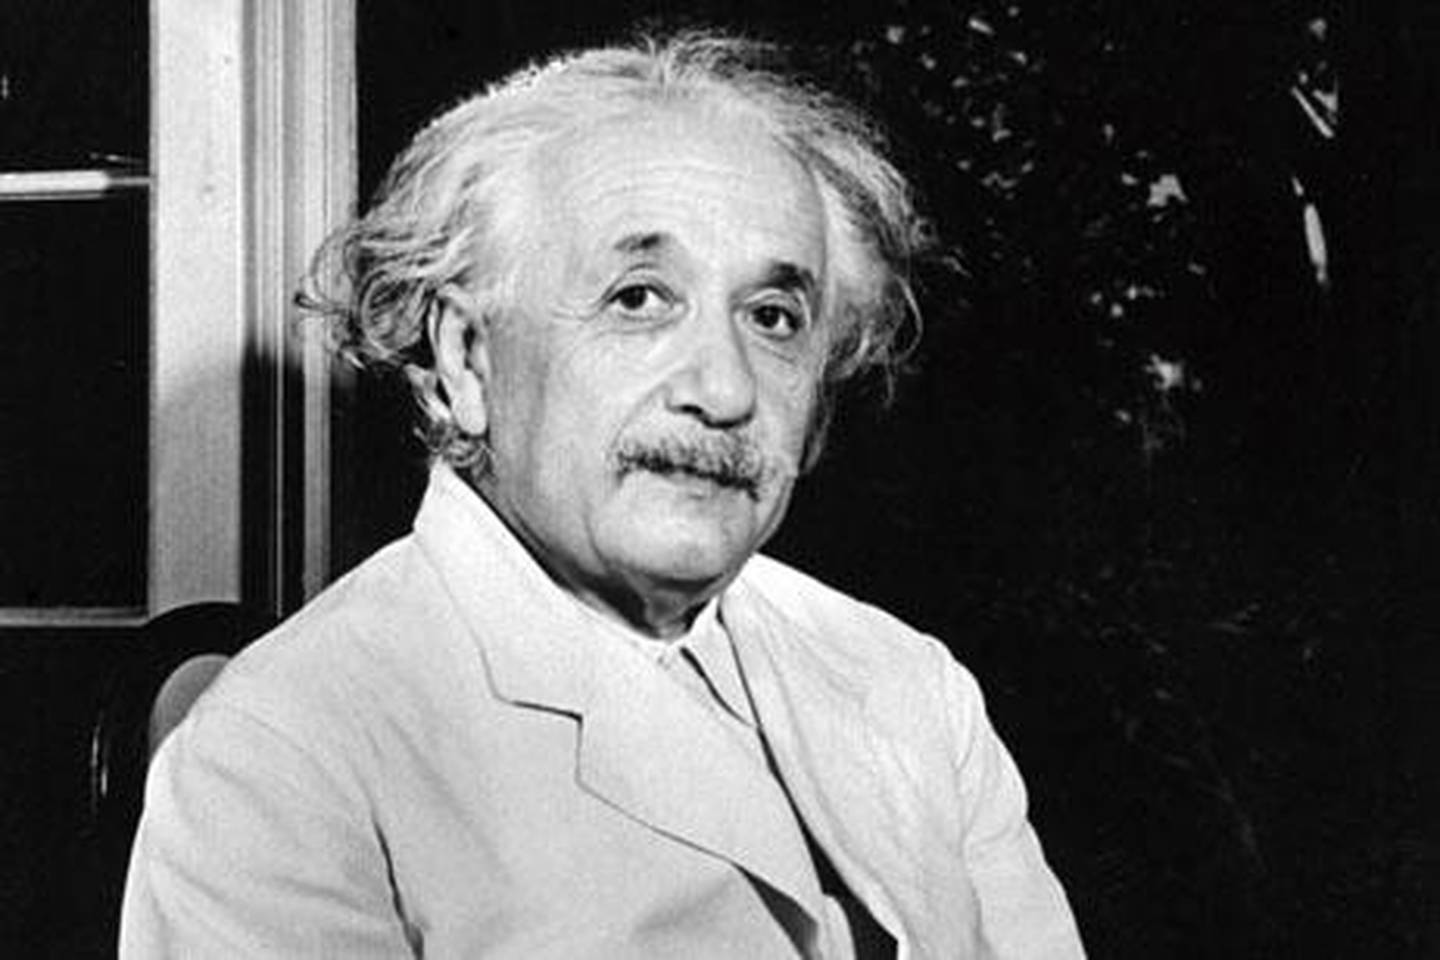 Undated portrait of German-born Swiss-US physicist Albert Einstein (1879-1955), author of theory of relativity, awarded the Nobel Prize for Physics in 1921.